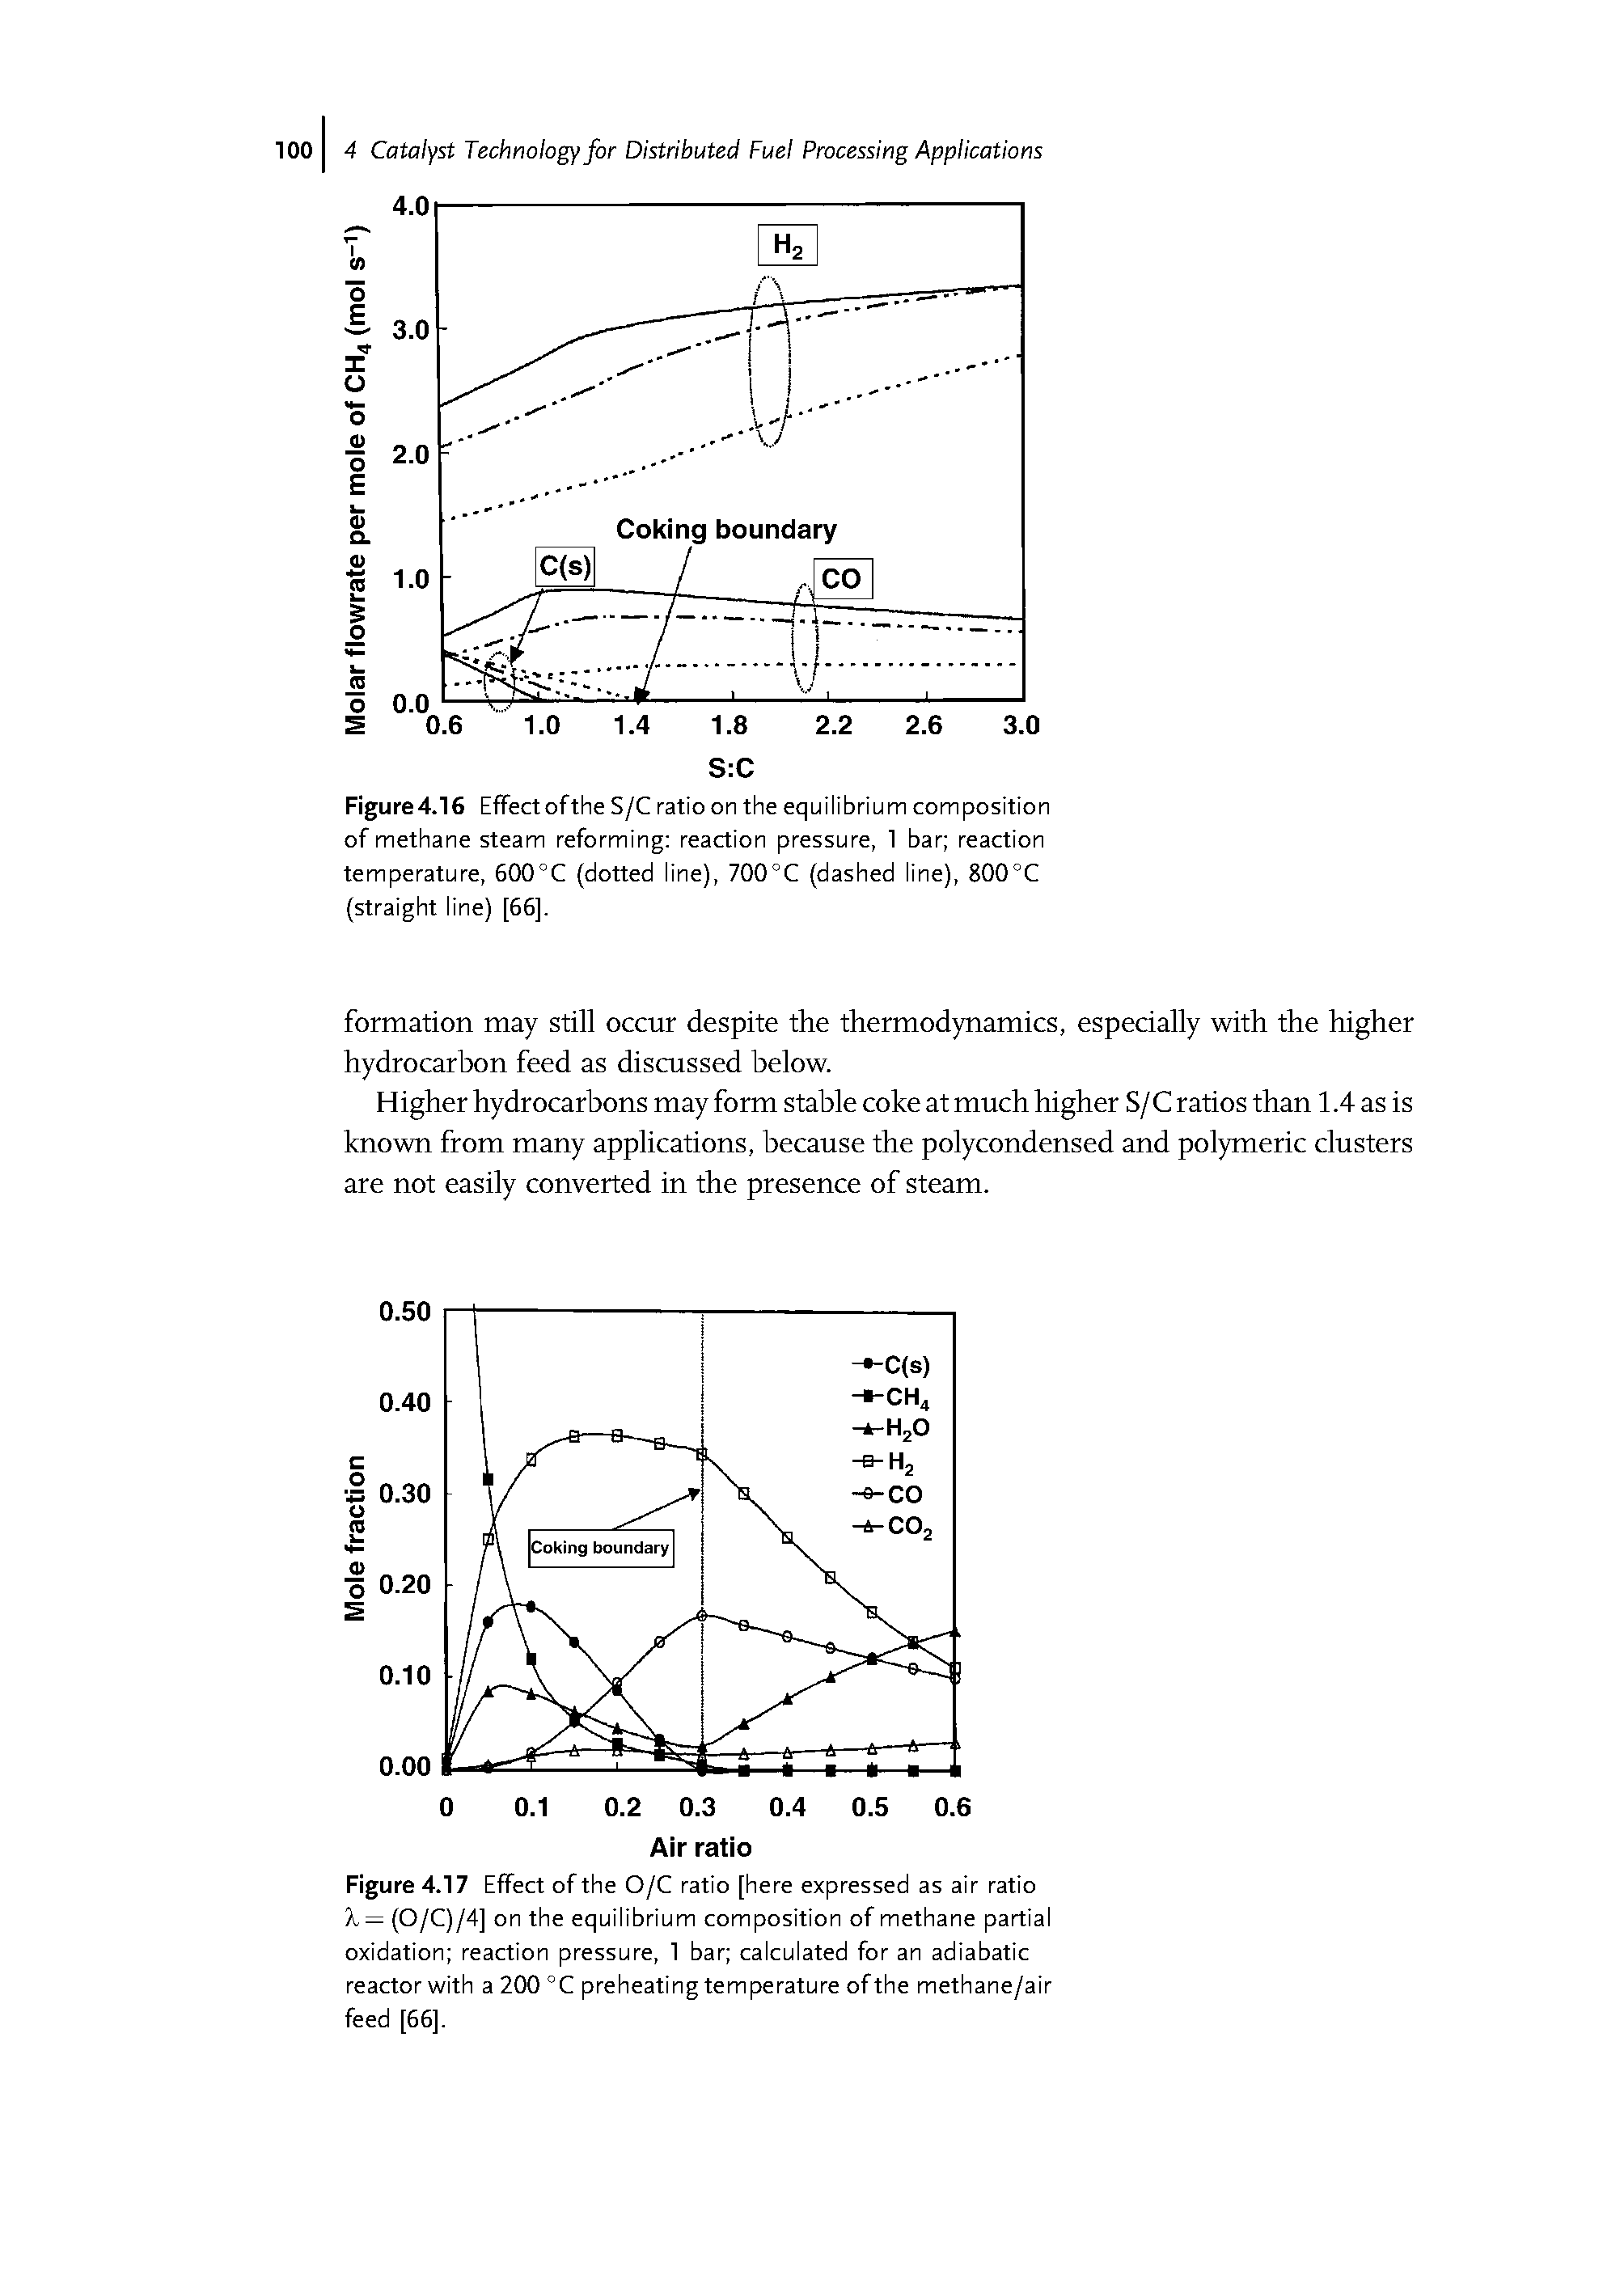 Figure4.16 Effect of the S/C ratio on the equilibrium composition of methane steam reforming reaction pressure, 1 bar reaction temperature, 600°C (dotted line), 700°C (dashed line), 800°C (straight line) [66].